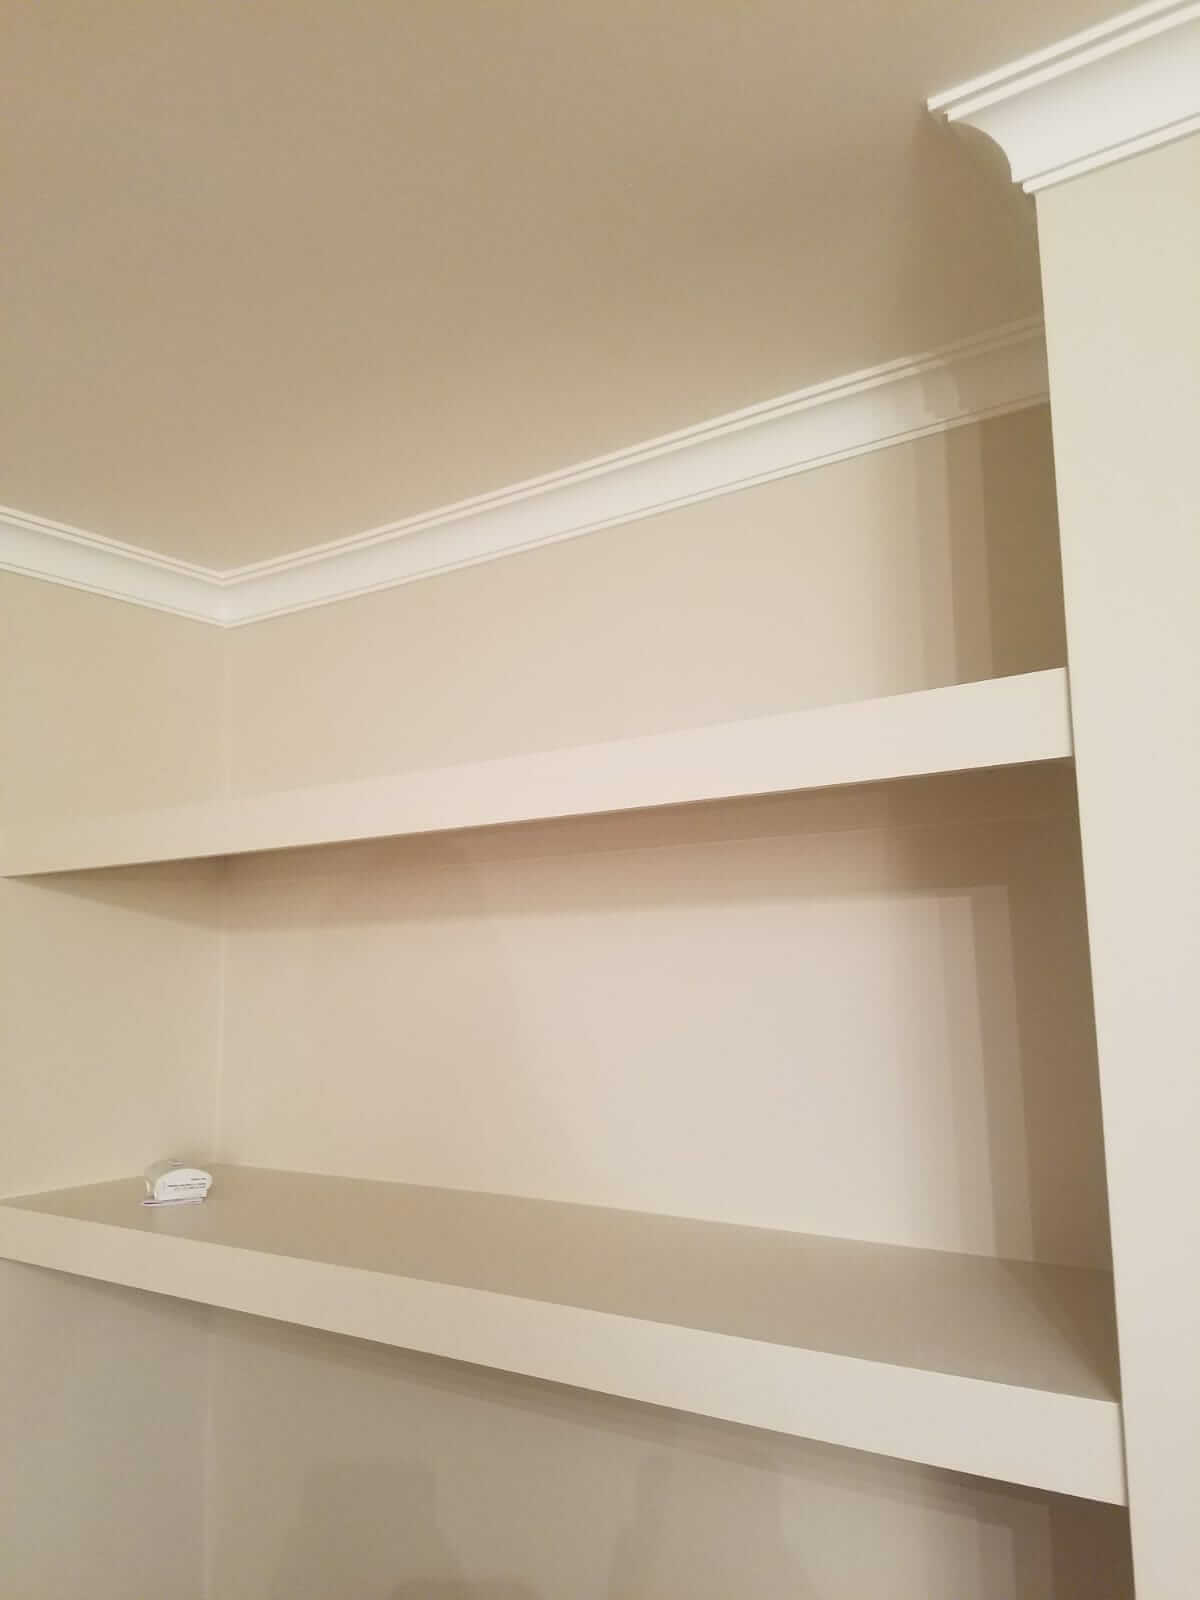 C3016 - Classic Coving above shelving